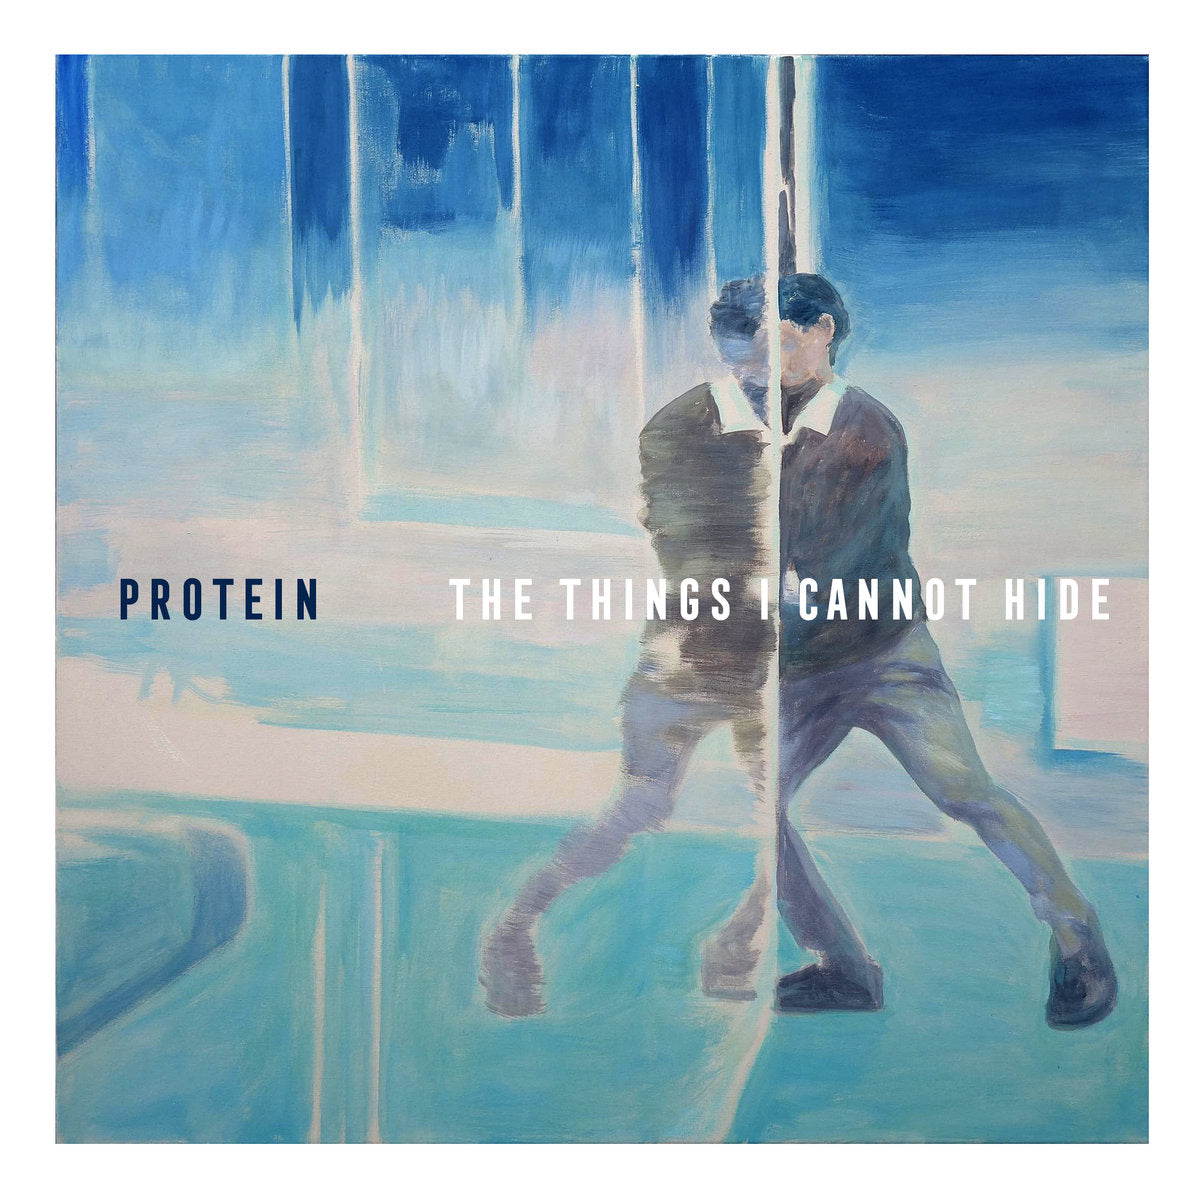 PROTEIN - THE THINGS I CANNOT HIDE Vinyl 7"